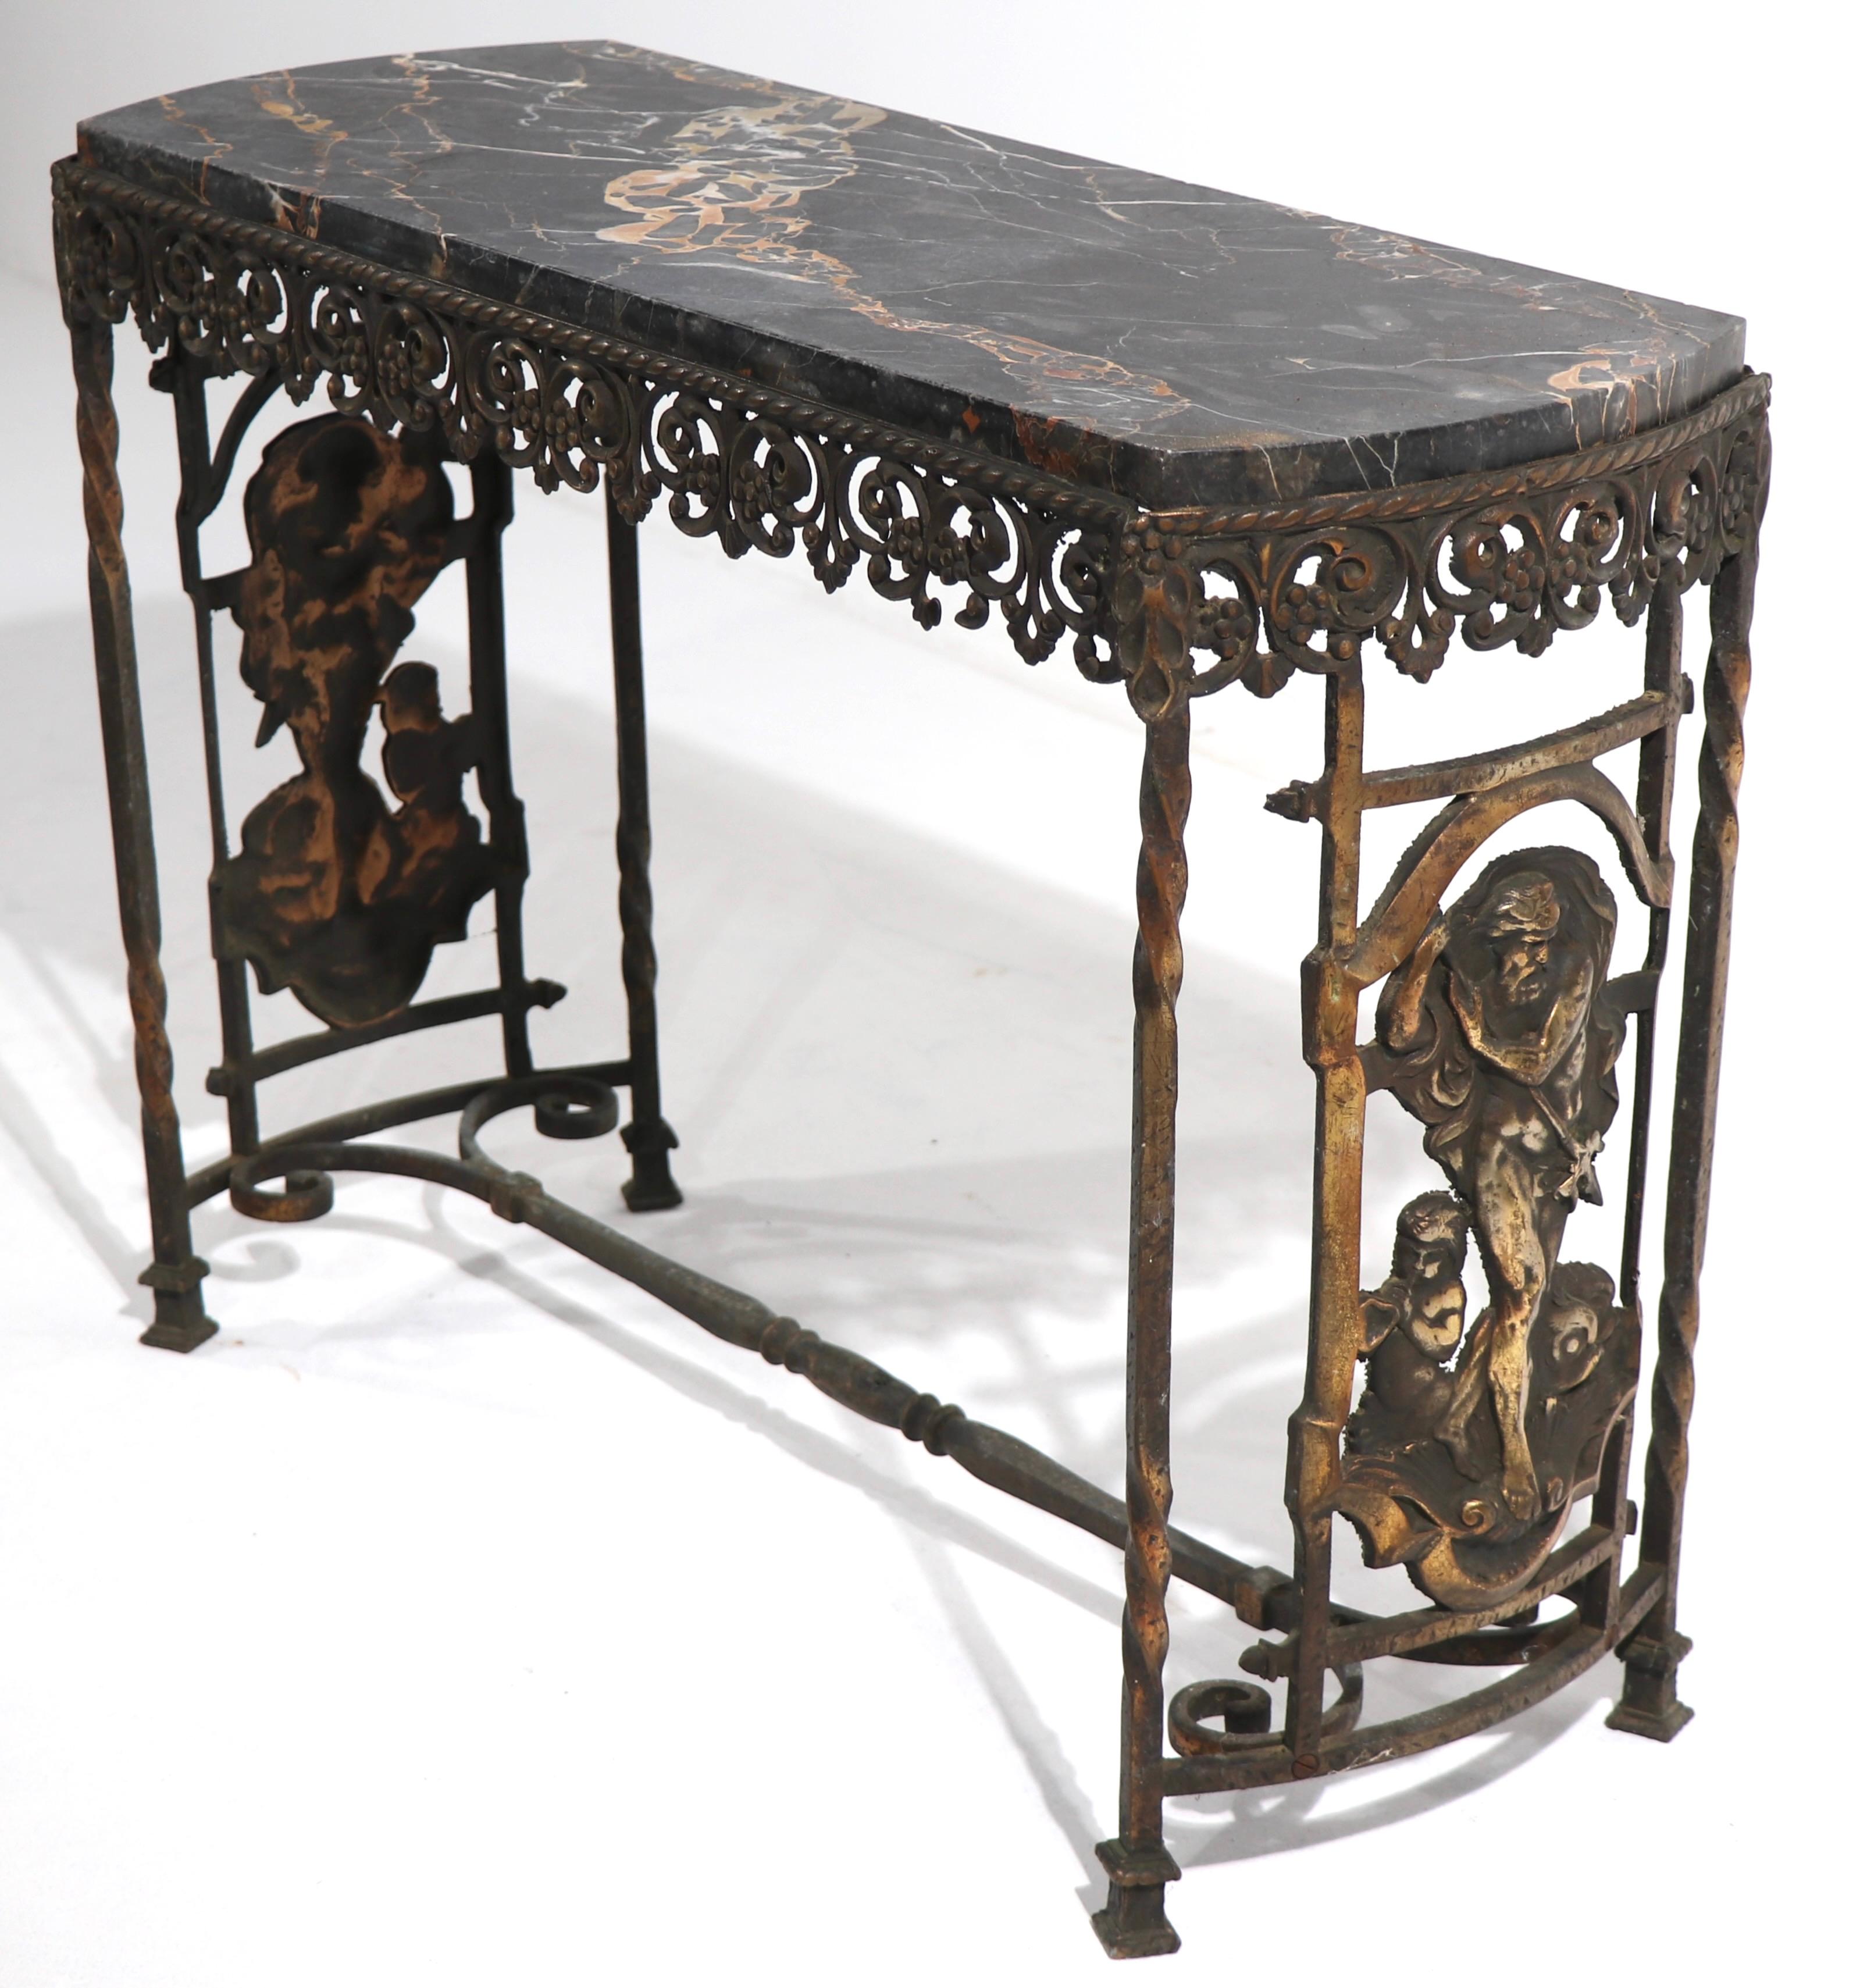 Art Deco period table having a cast bronze base and original oval marble top.
The base features decorative cast panels depicting classical imagery, the squared legs twist and the top metal skirt is reticulated. Heavy, well cast, and in very good